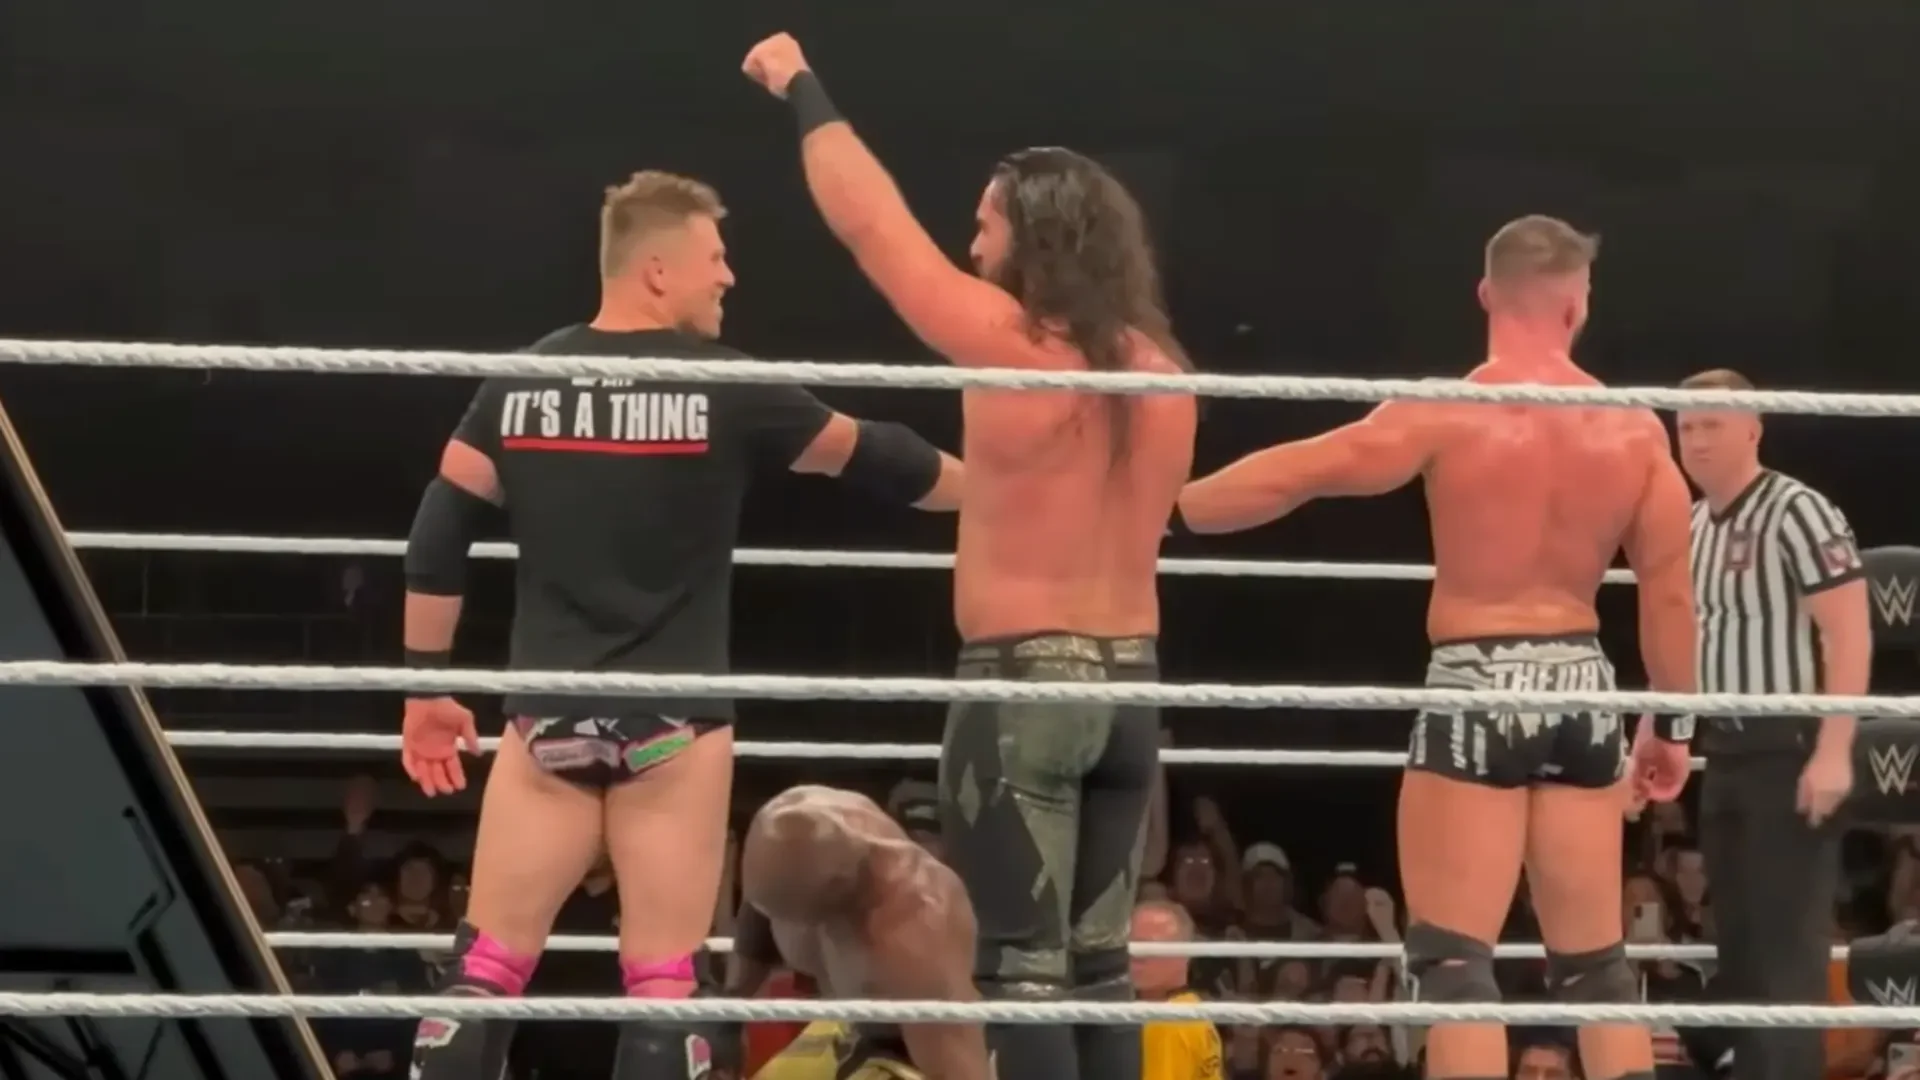 WATCH: Seth Rollins, The Miz and Austin Theory Did The Shield's Fist Pose At WWE Live Event